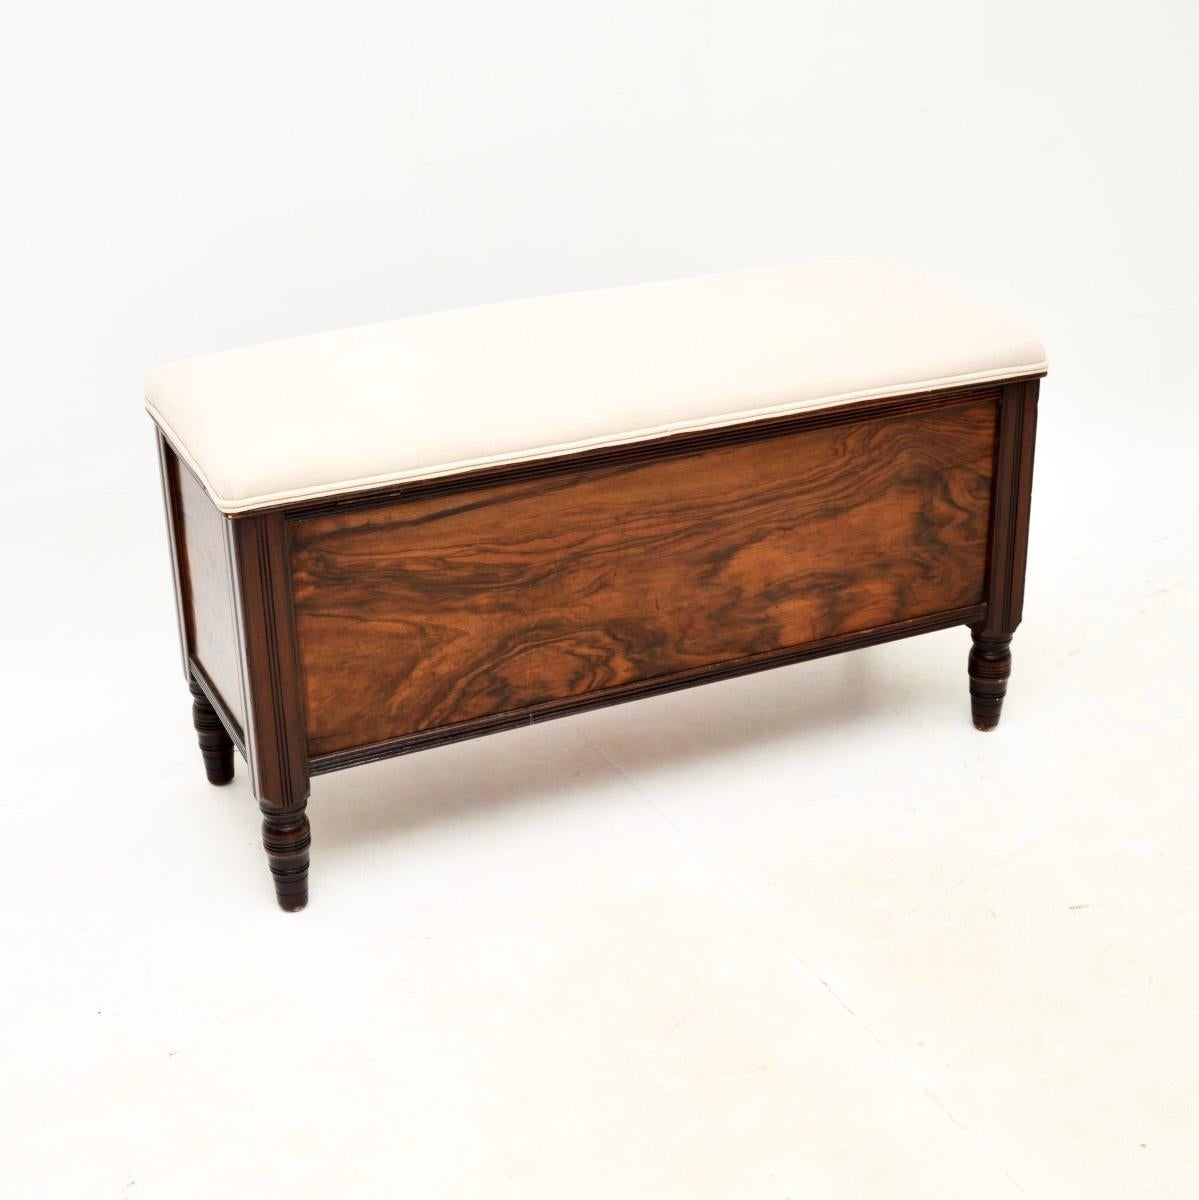 A wonderful antique Victorian walnut ottoman blanket chest / stool. This was made in England, it dates from around the 1860-1880 period.

It is of superb quality and is a useful size. There is lots of storage space inside, revealed when the